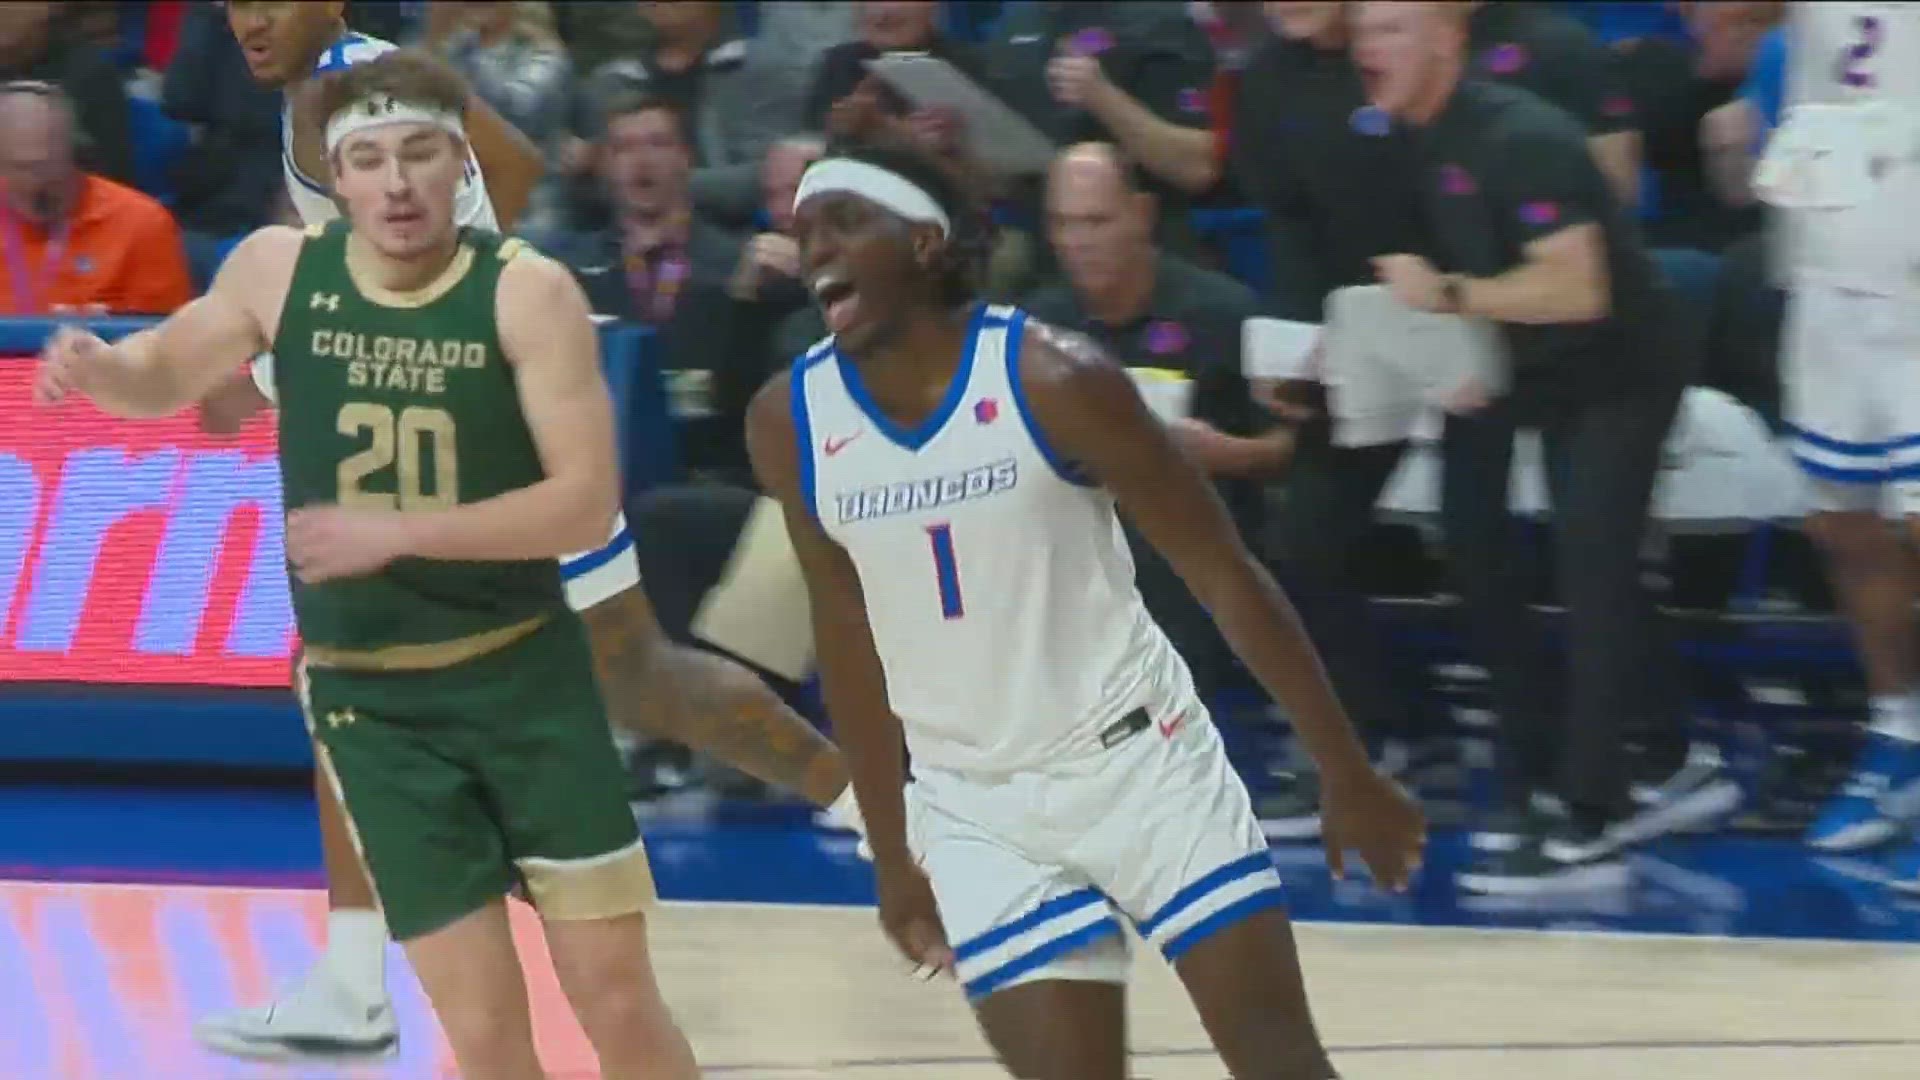 Boise State extended its nation-leading home winning streak to 22 games on Tuesday with a 65-58 win over No. 17 Colorado State at ExtraMile Arena.